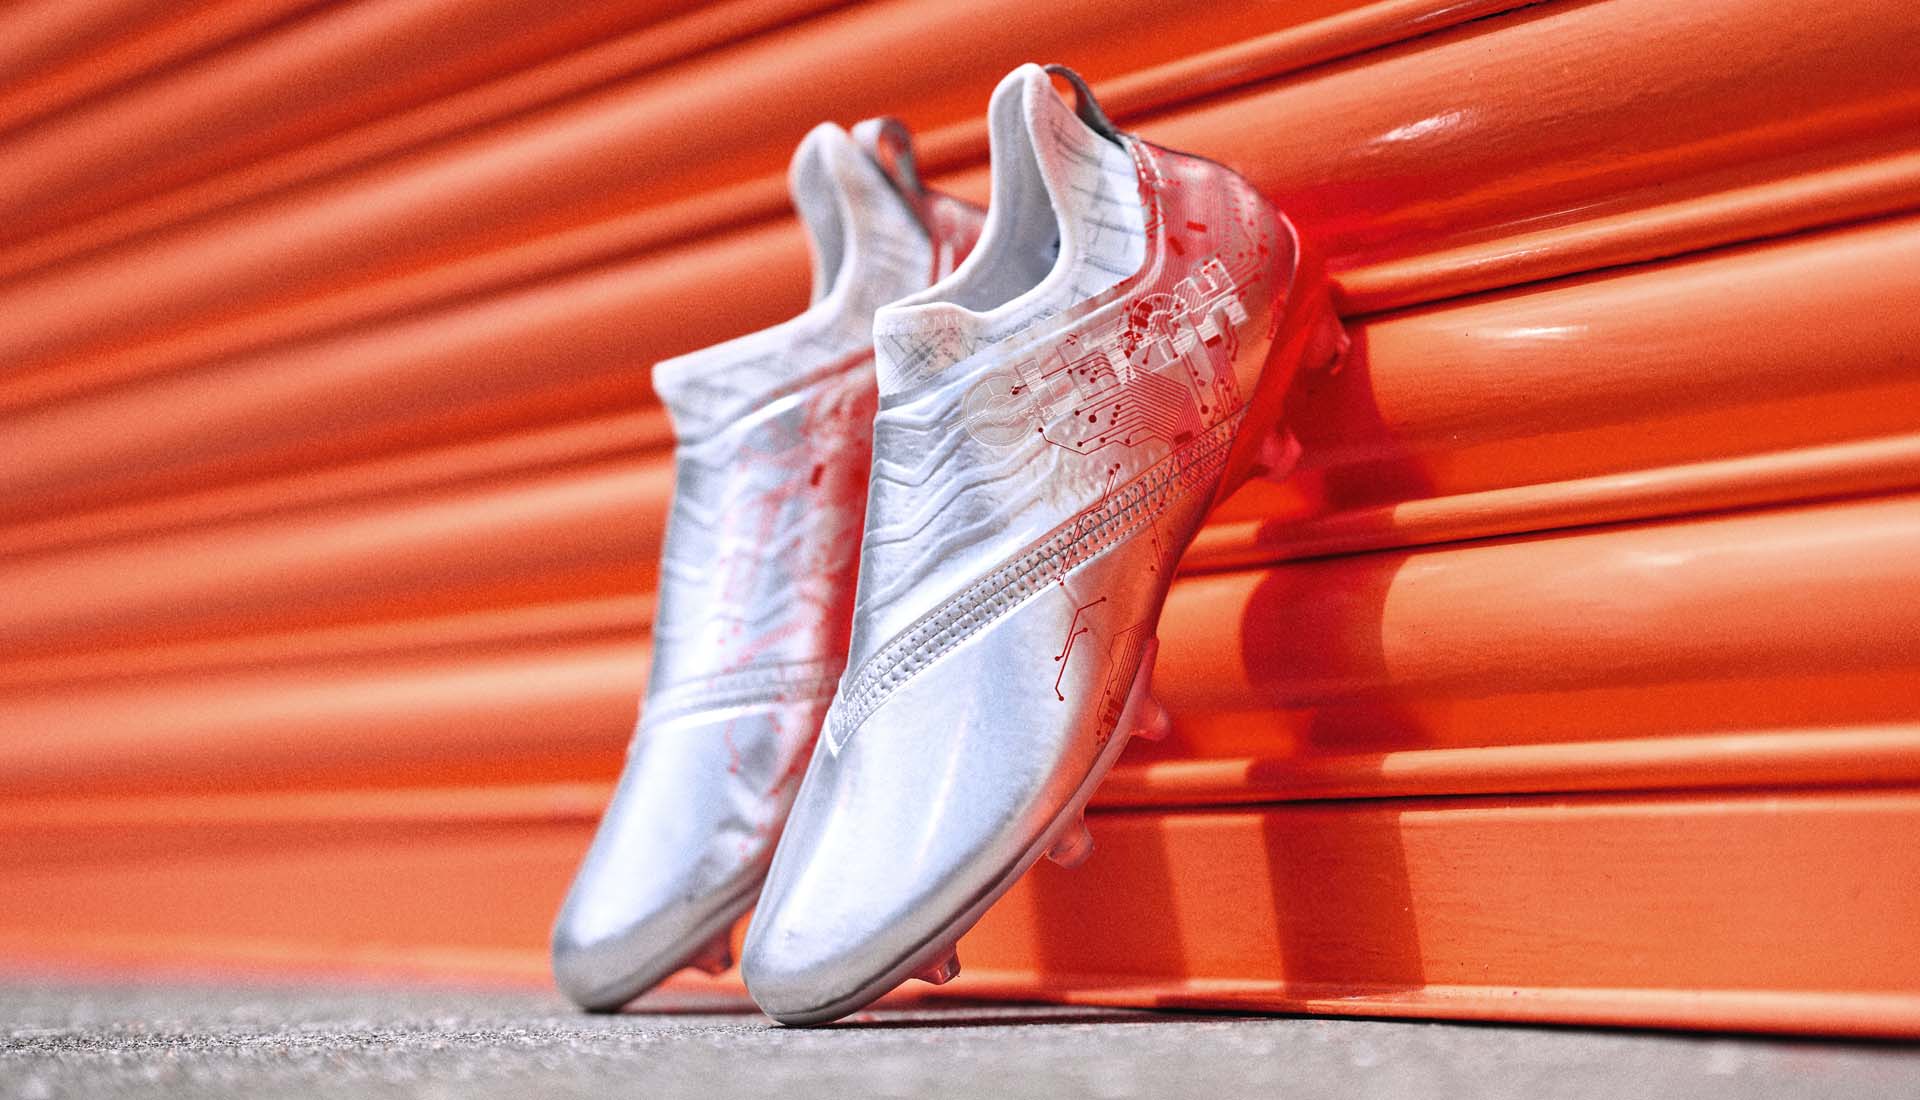 adidas Launch The Glitch 19 "302 Redirect" - SoccerBible